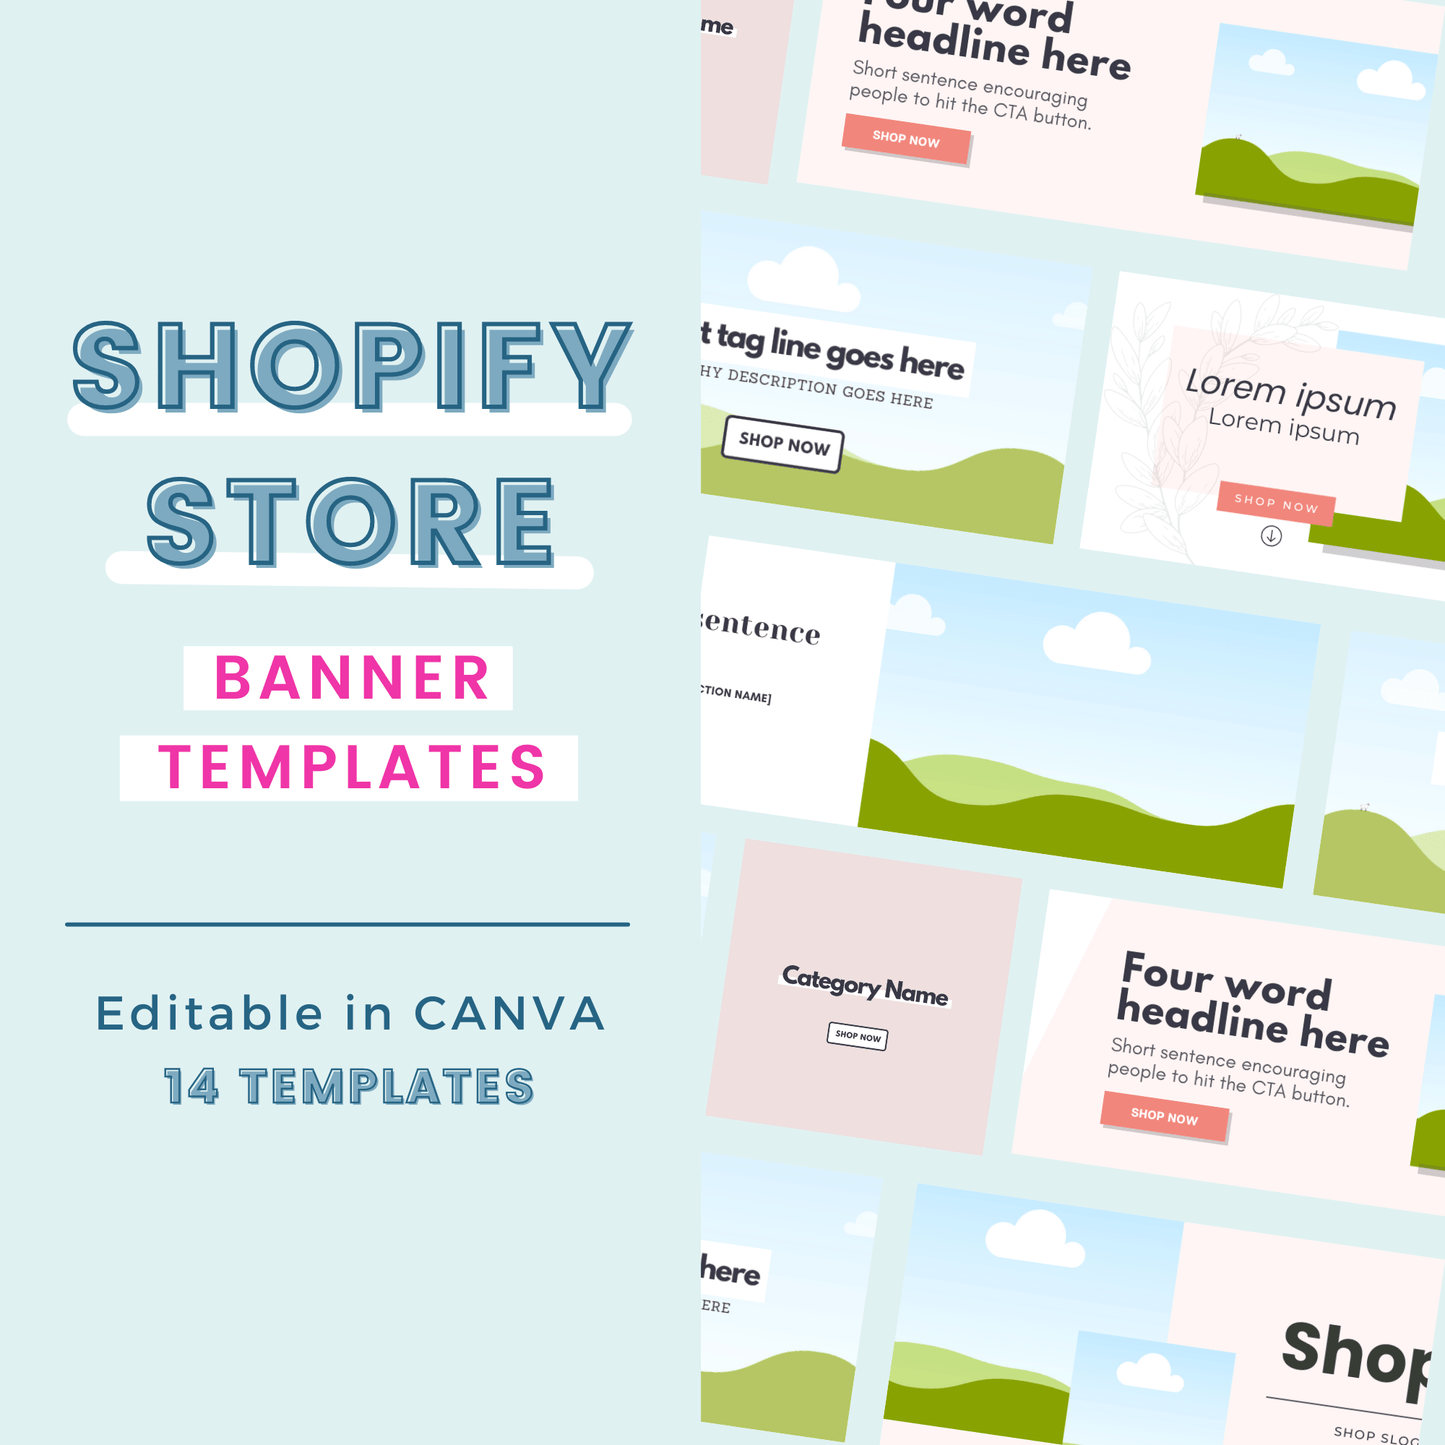 Shopify Store Templates